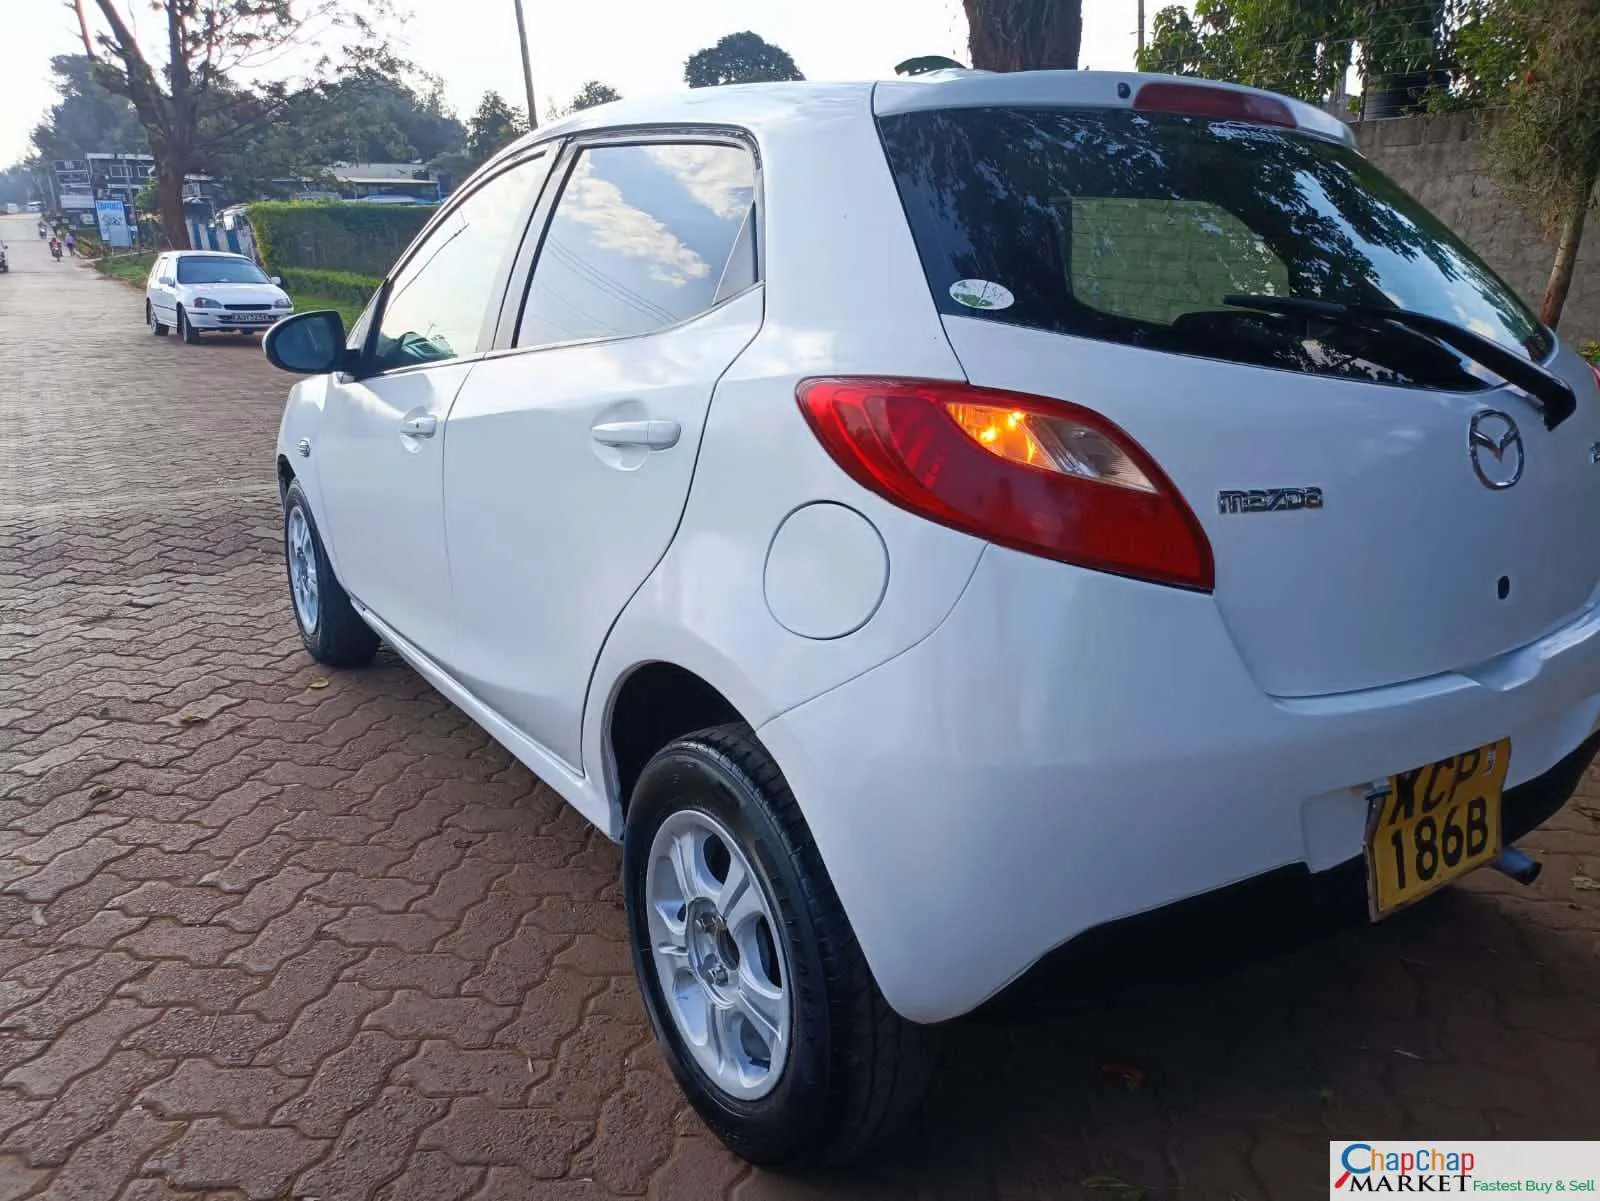 Cars Cars For Sale-Mazda Demio 🔥 🔥 You Pay 30% DEPOSIT TRADE IN OK EXCLUSIVE demio for sale in kenya hire purchase installments 2